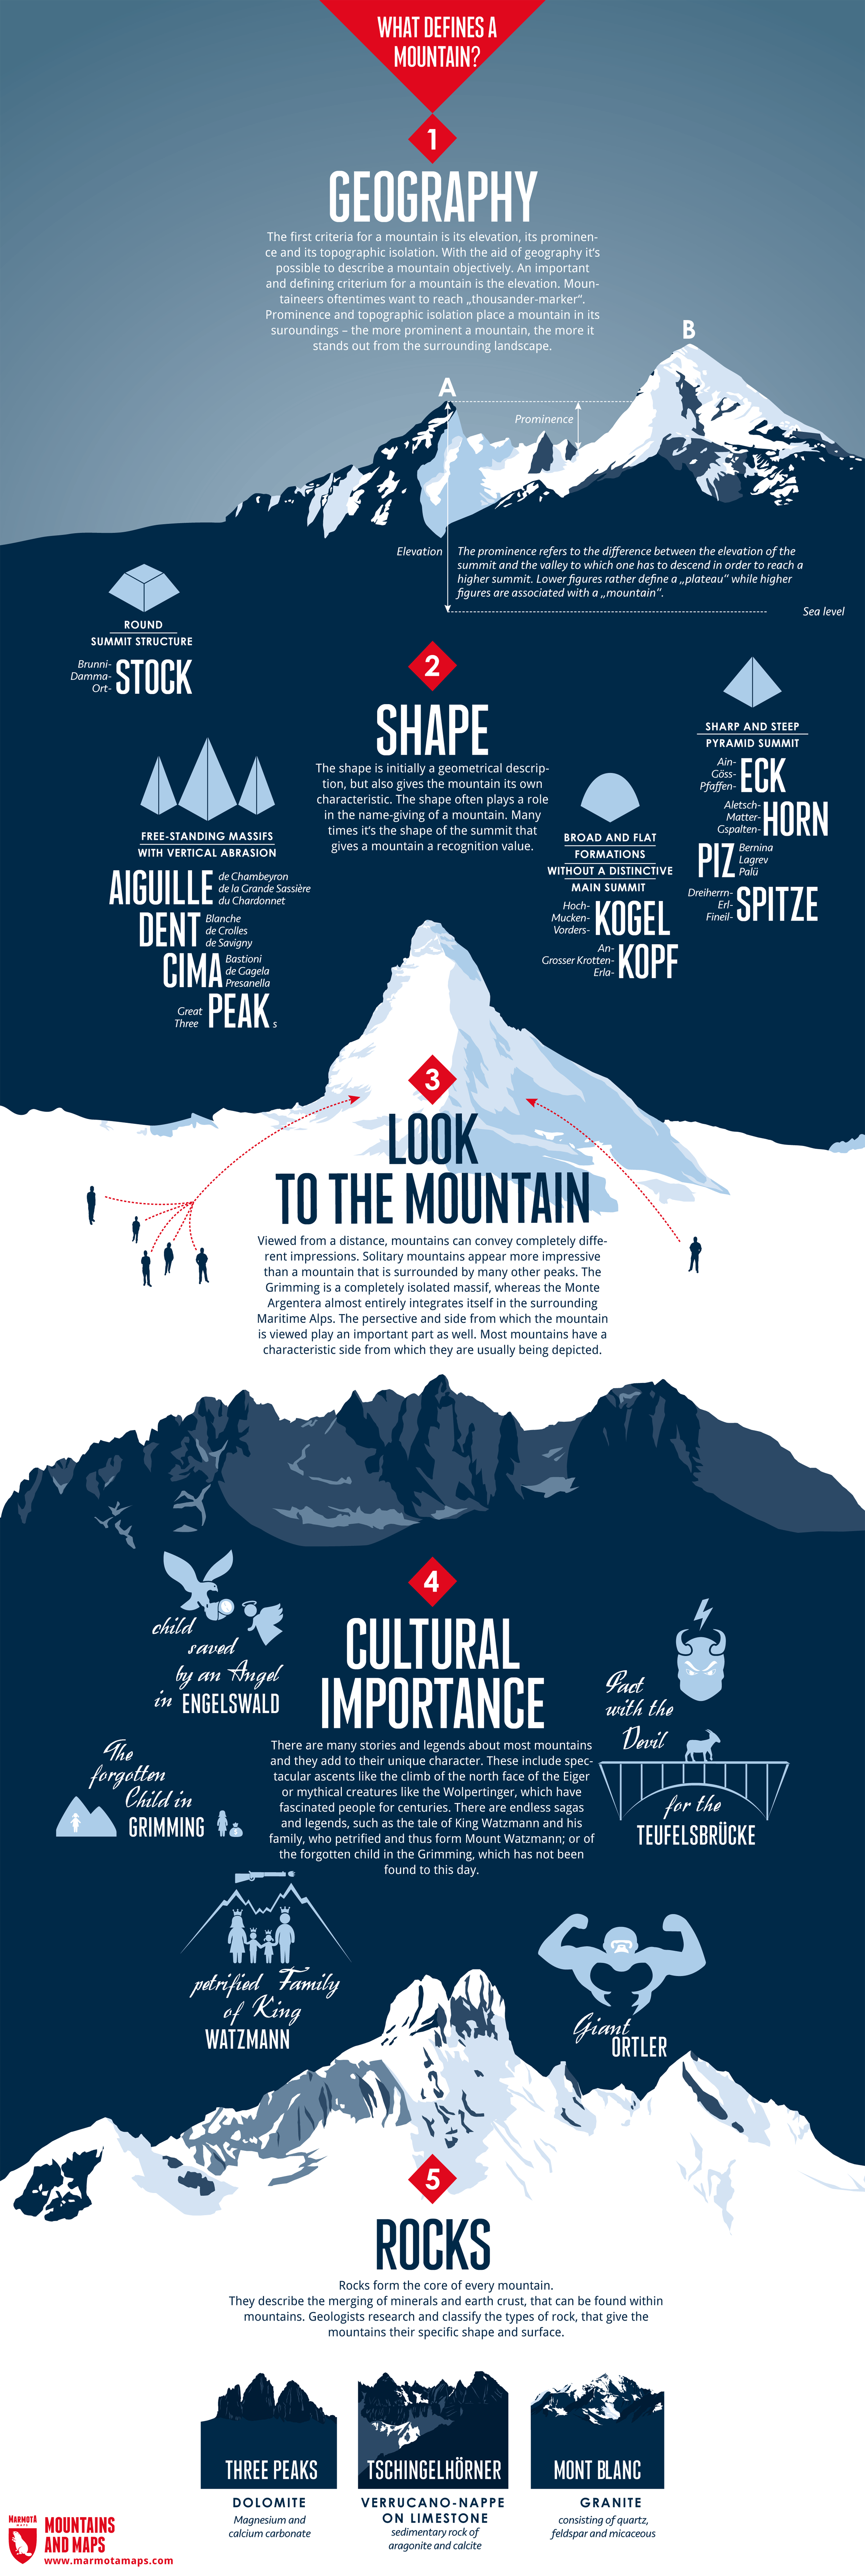 What defines a mountain